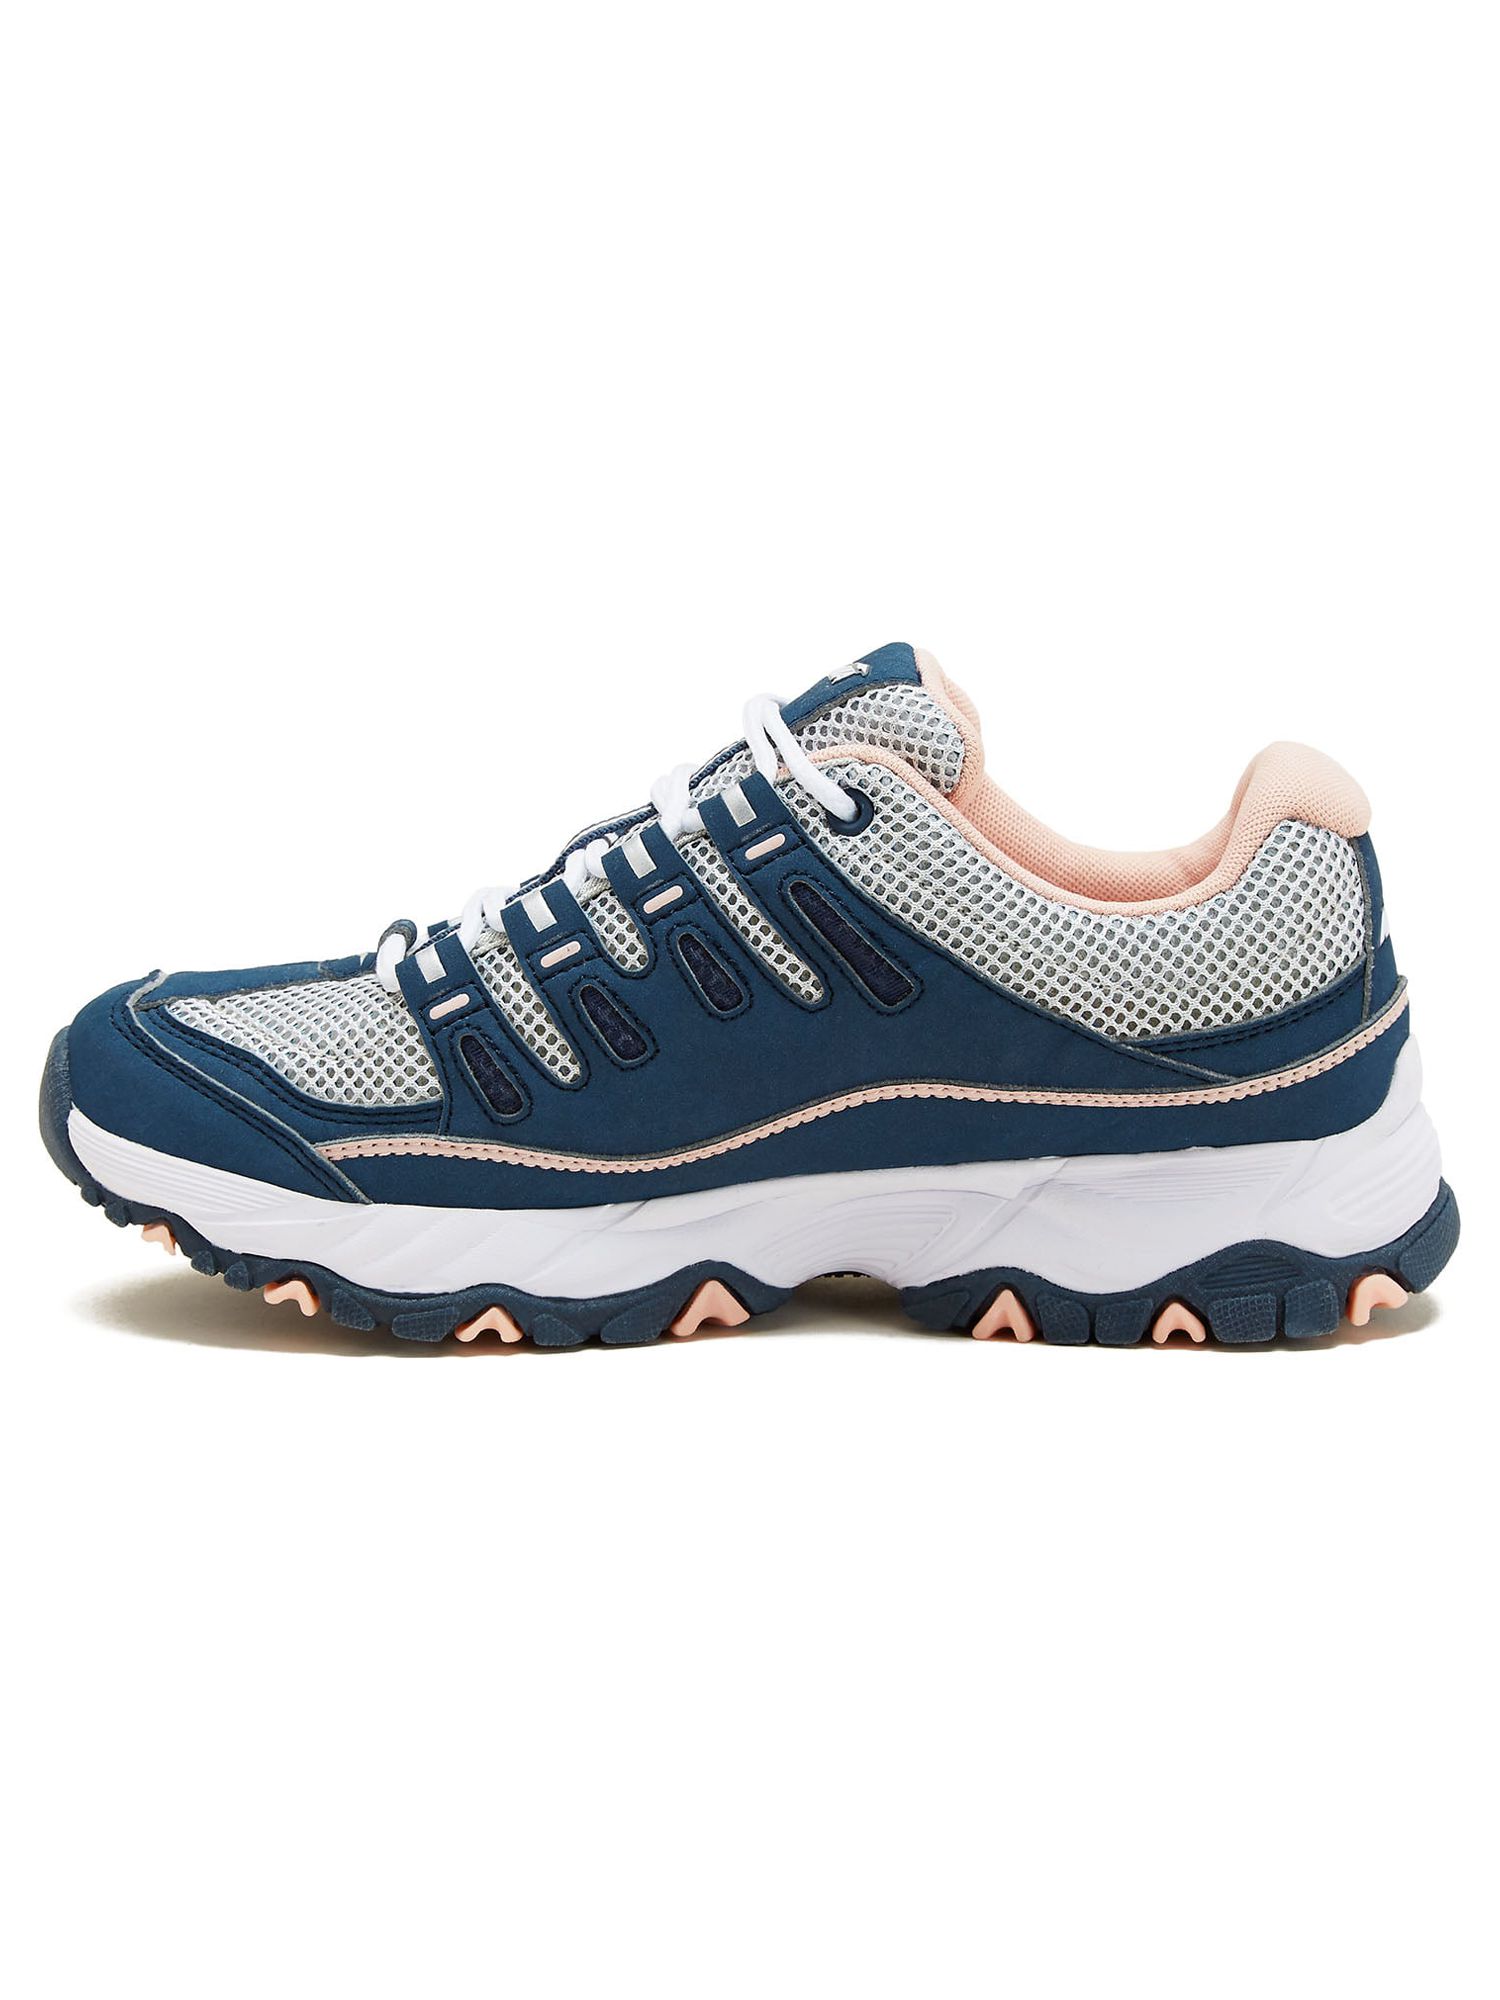 Avia Women's Elevate Athletic Sneakers, Wide Width Available - image 2 of 5